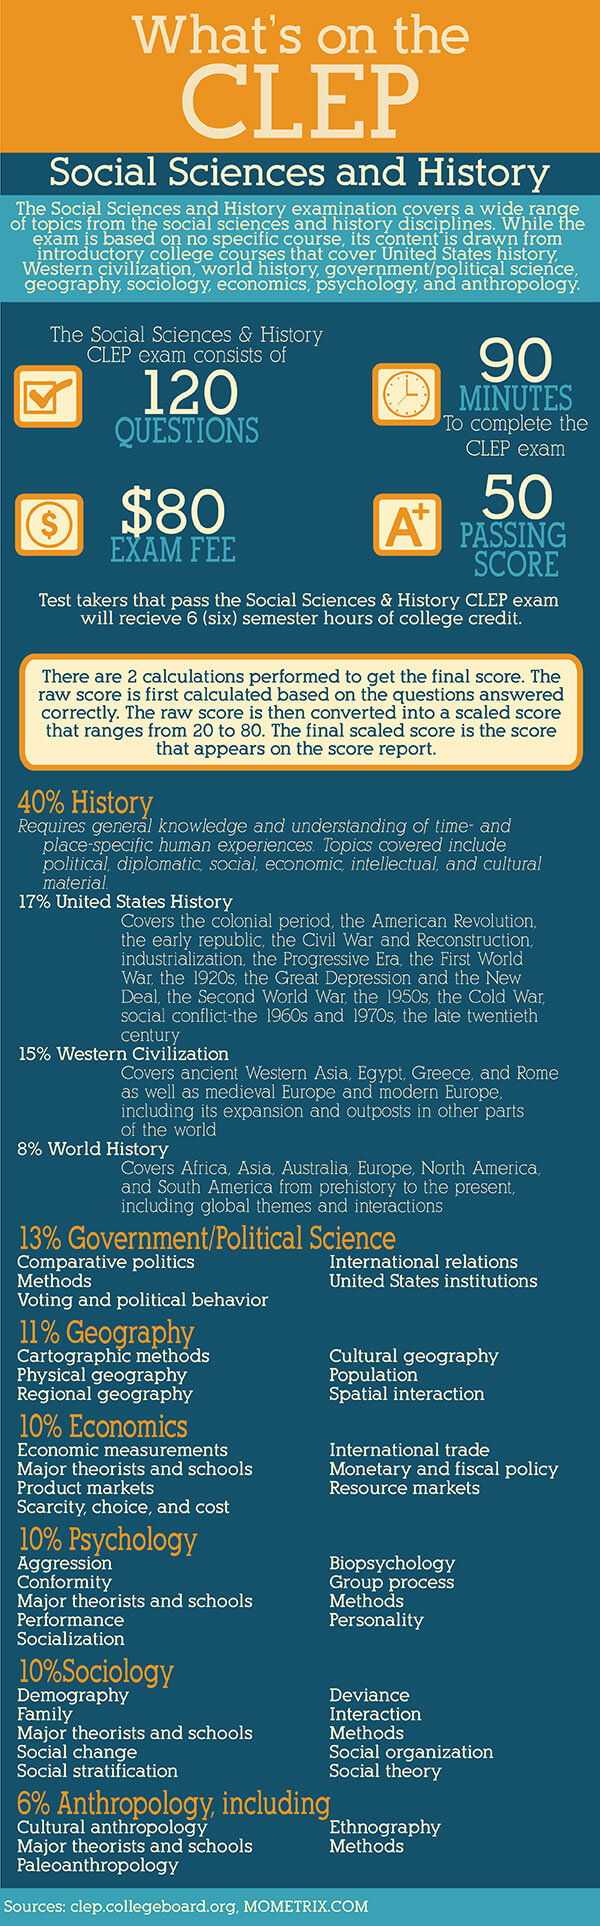 Infographic explaining social sciences and history CLEP exam